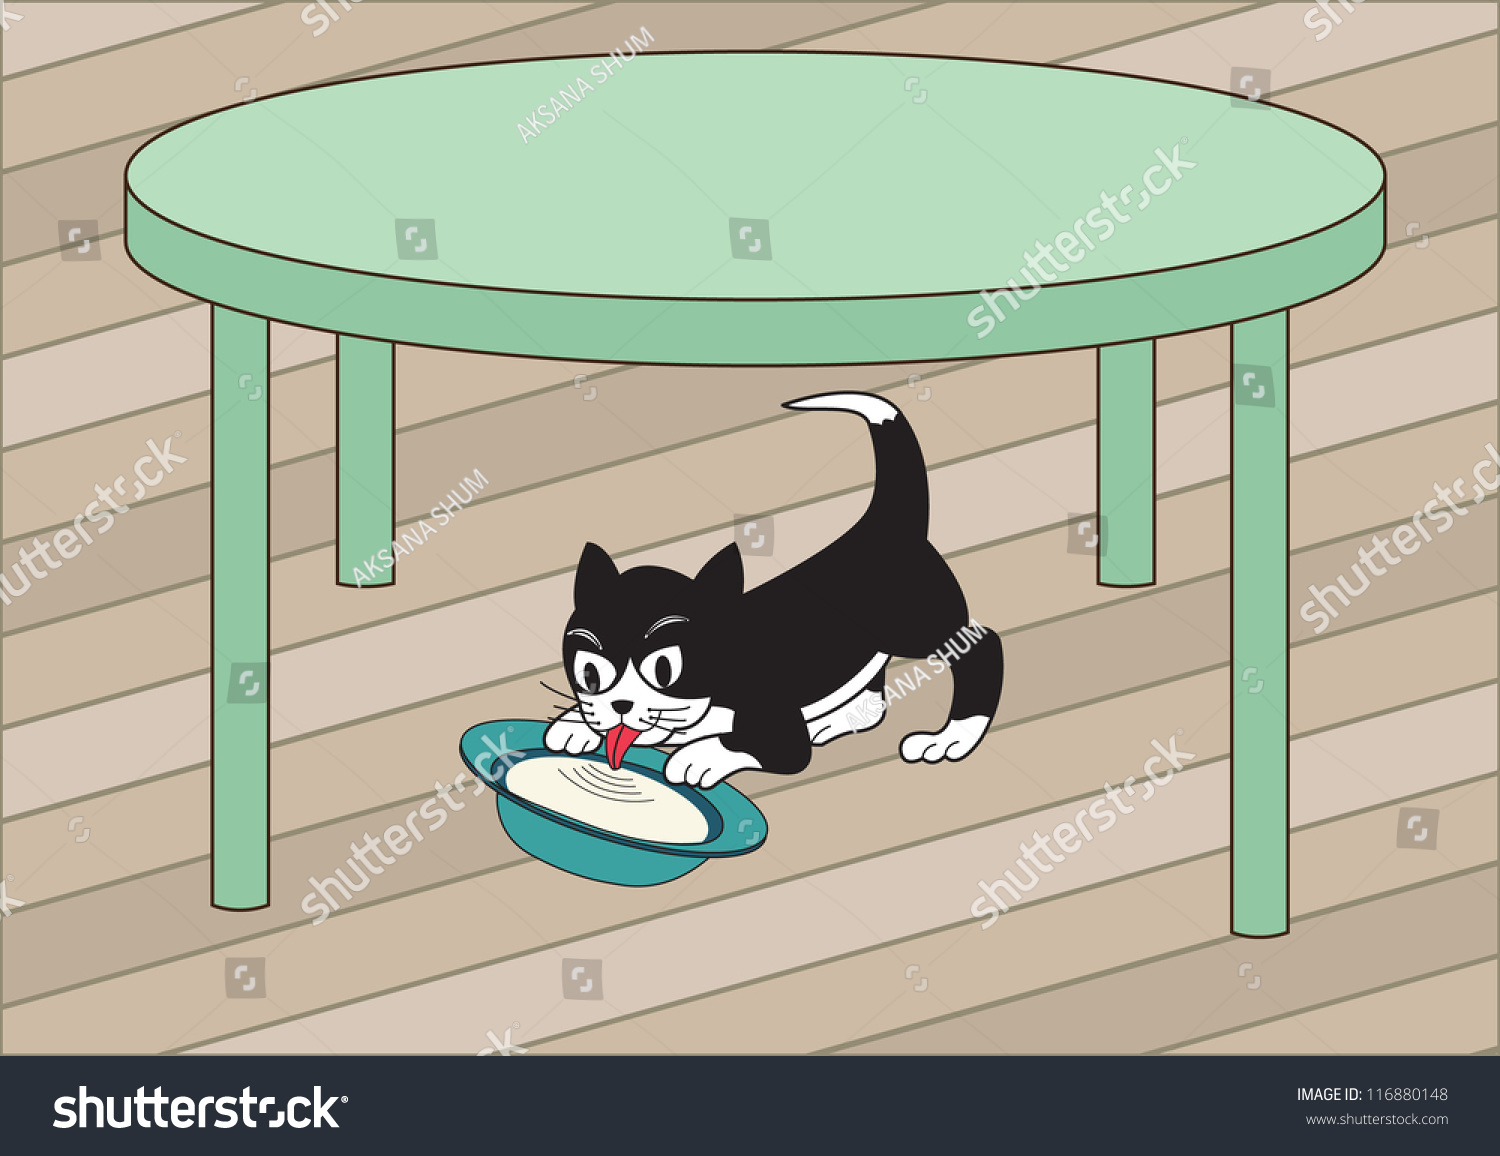 clipart cat under the table - photo #49